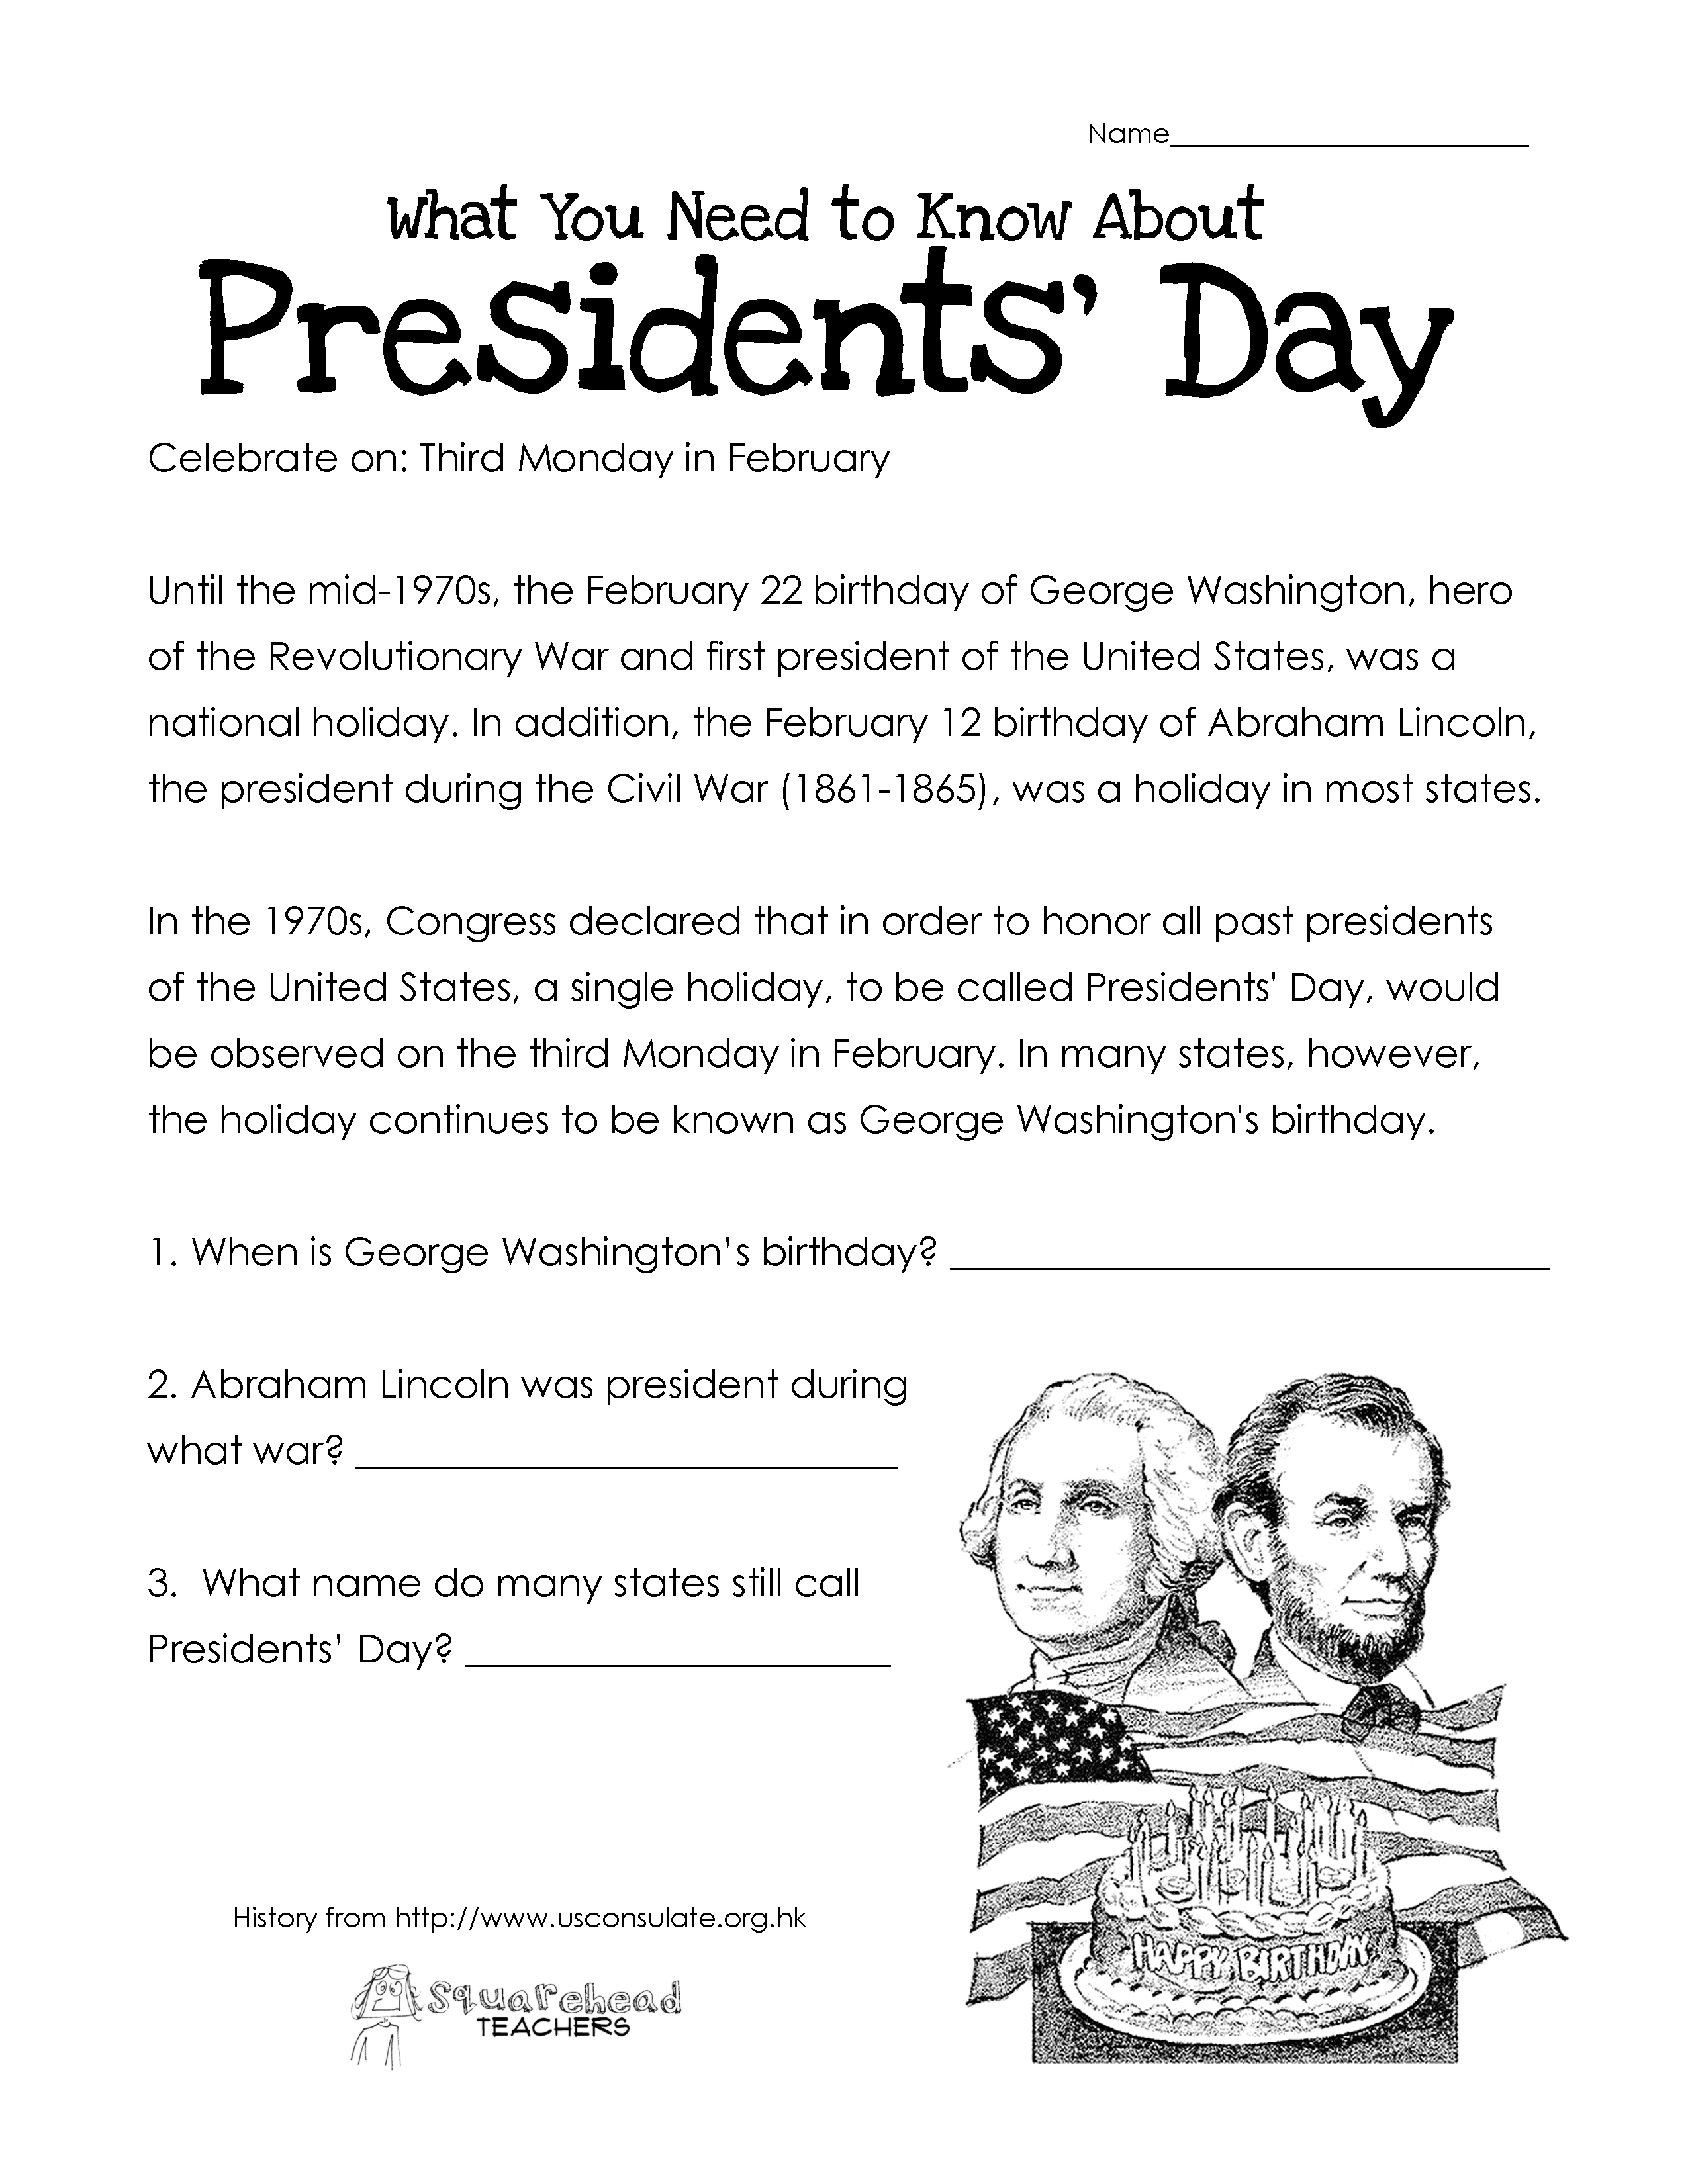 Free Printable History Worksheets For 5th Grade